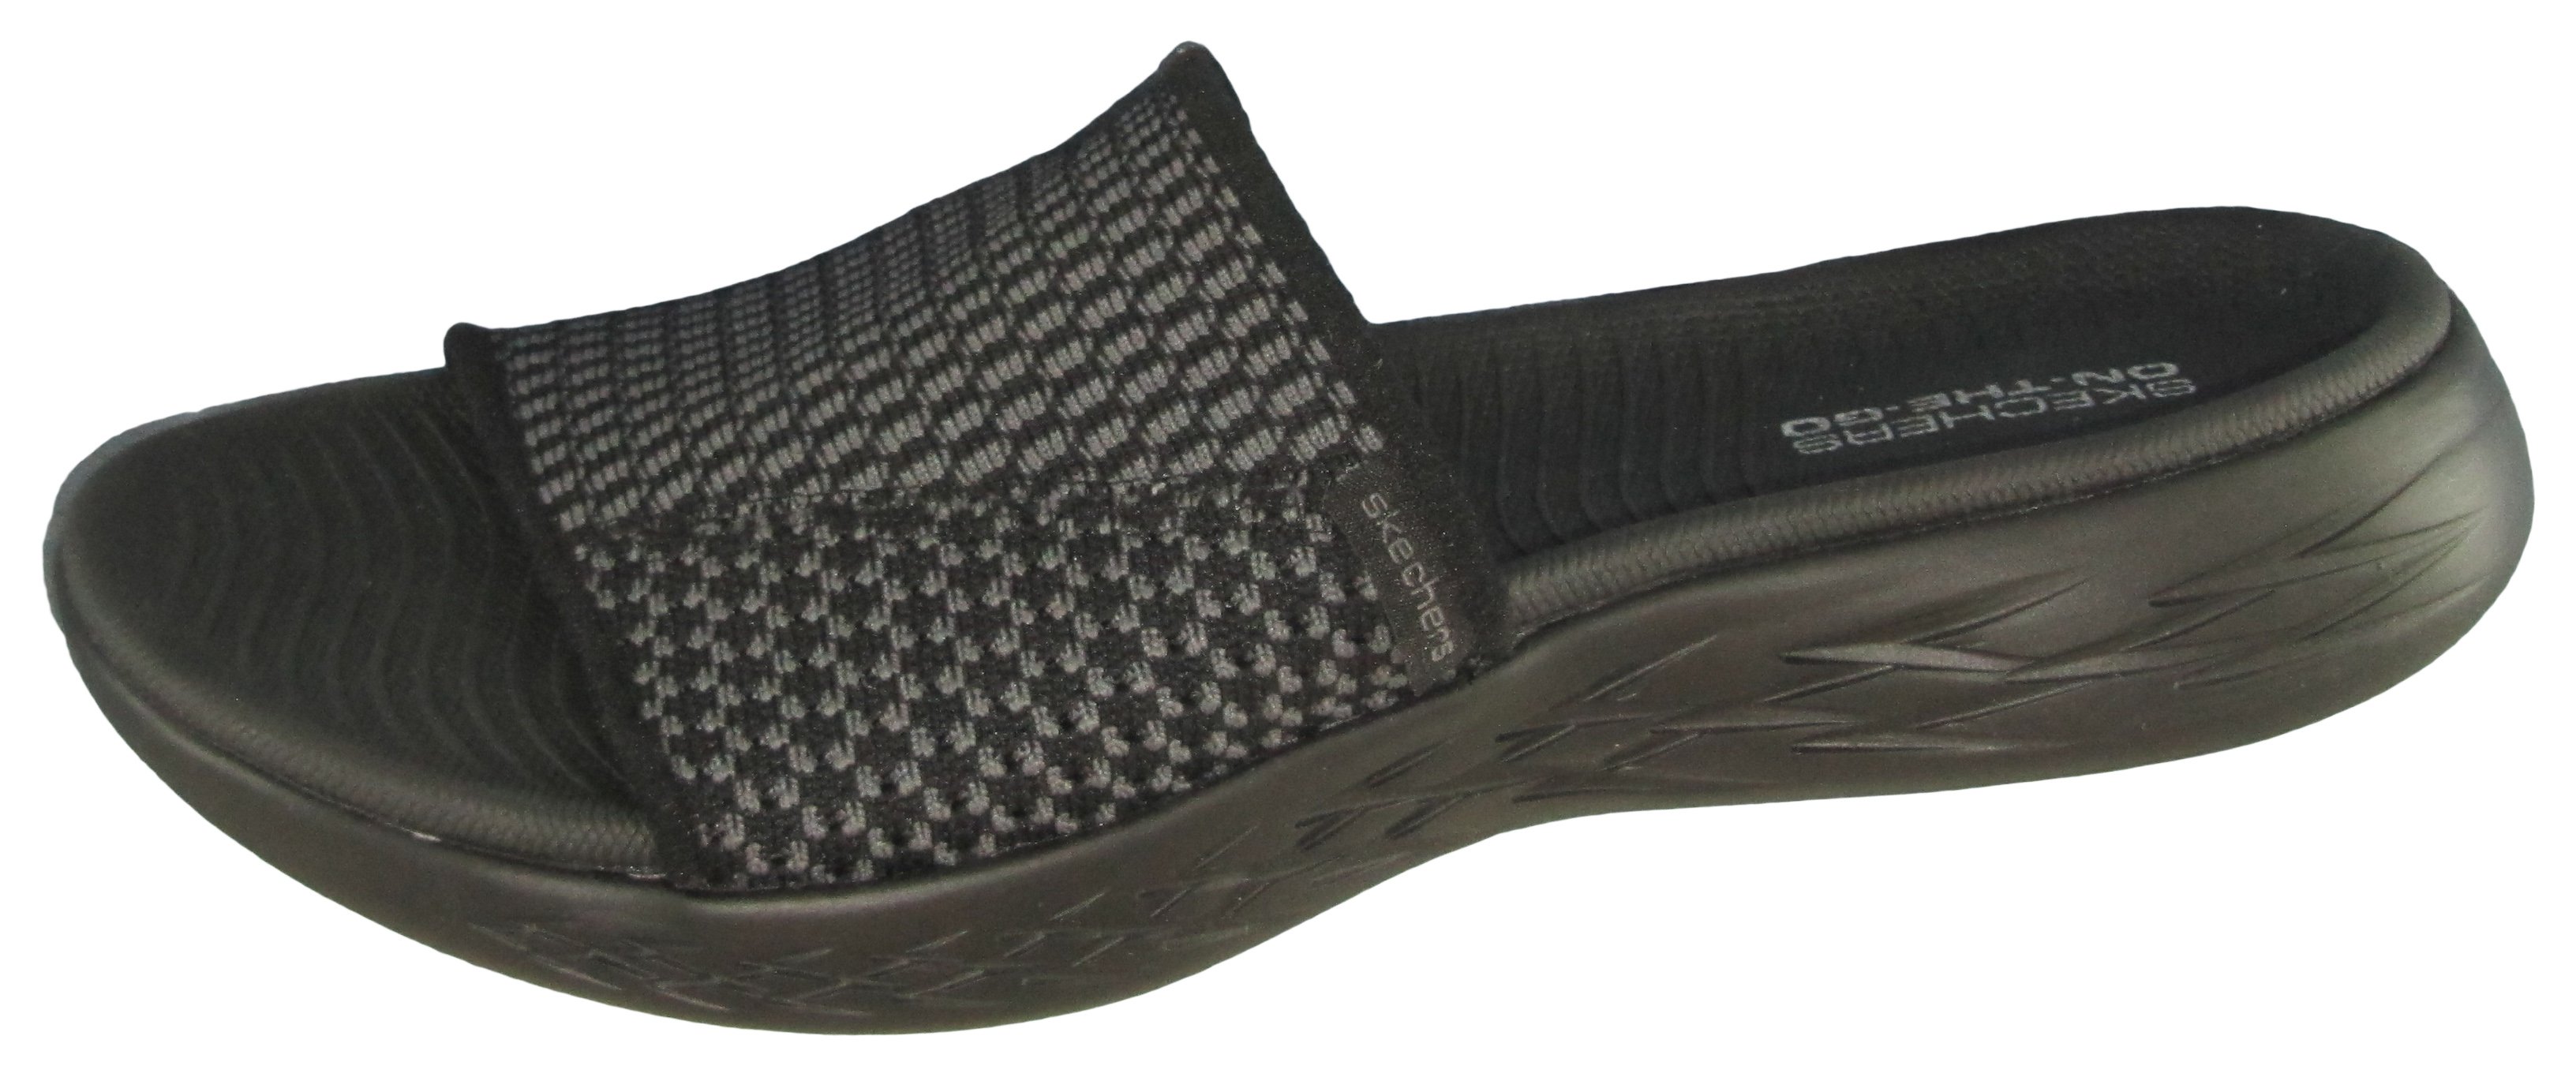 15305 - ON THE GO 600 SKECHERS - WOMENS SHOES-SCUFFS & SLIDES : Shirley ...